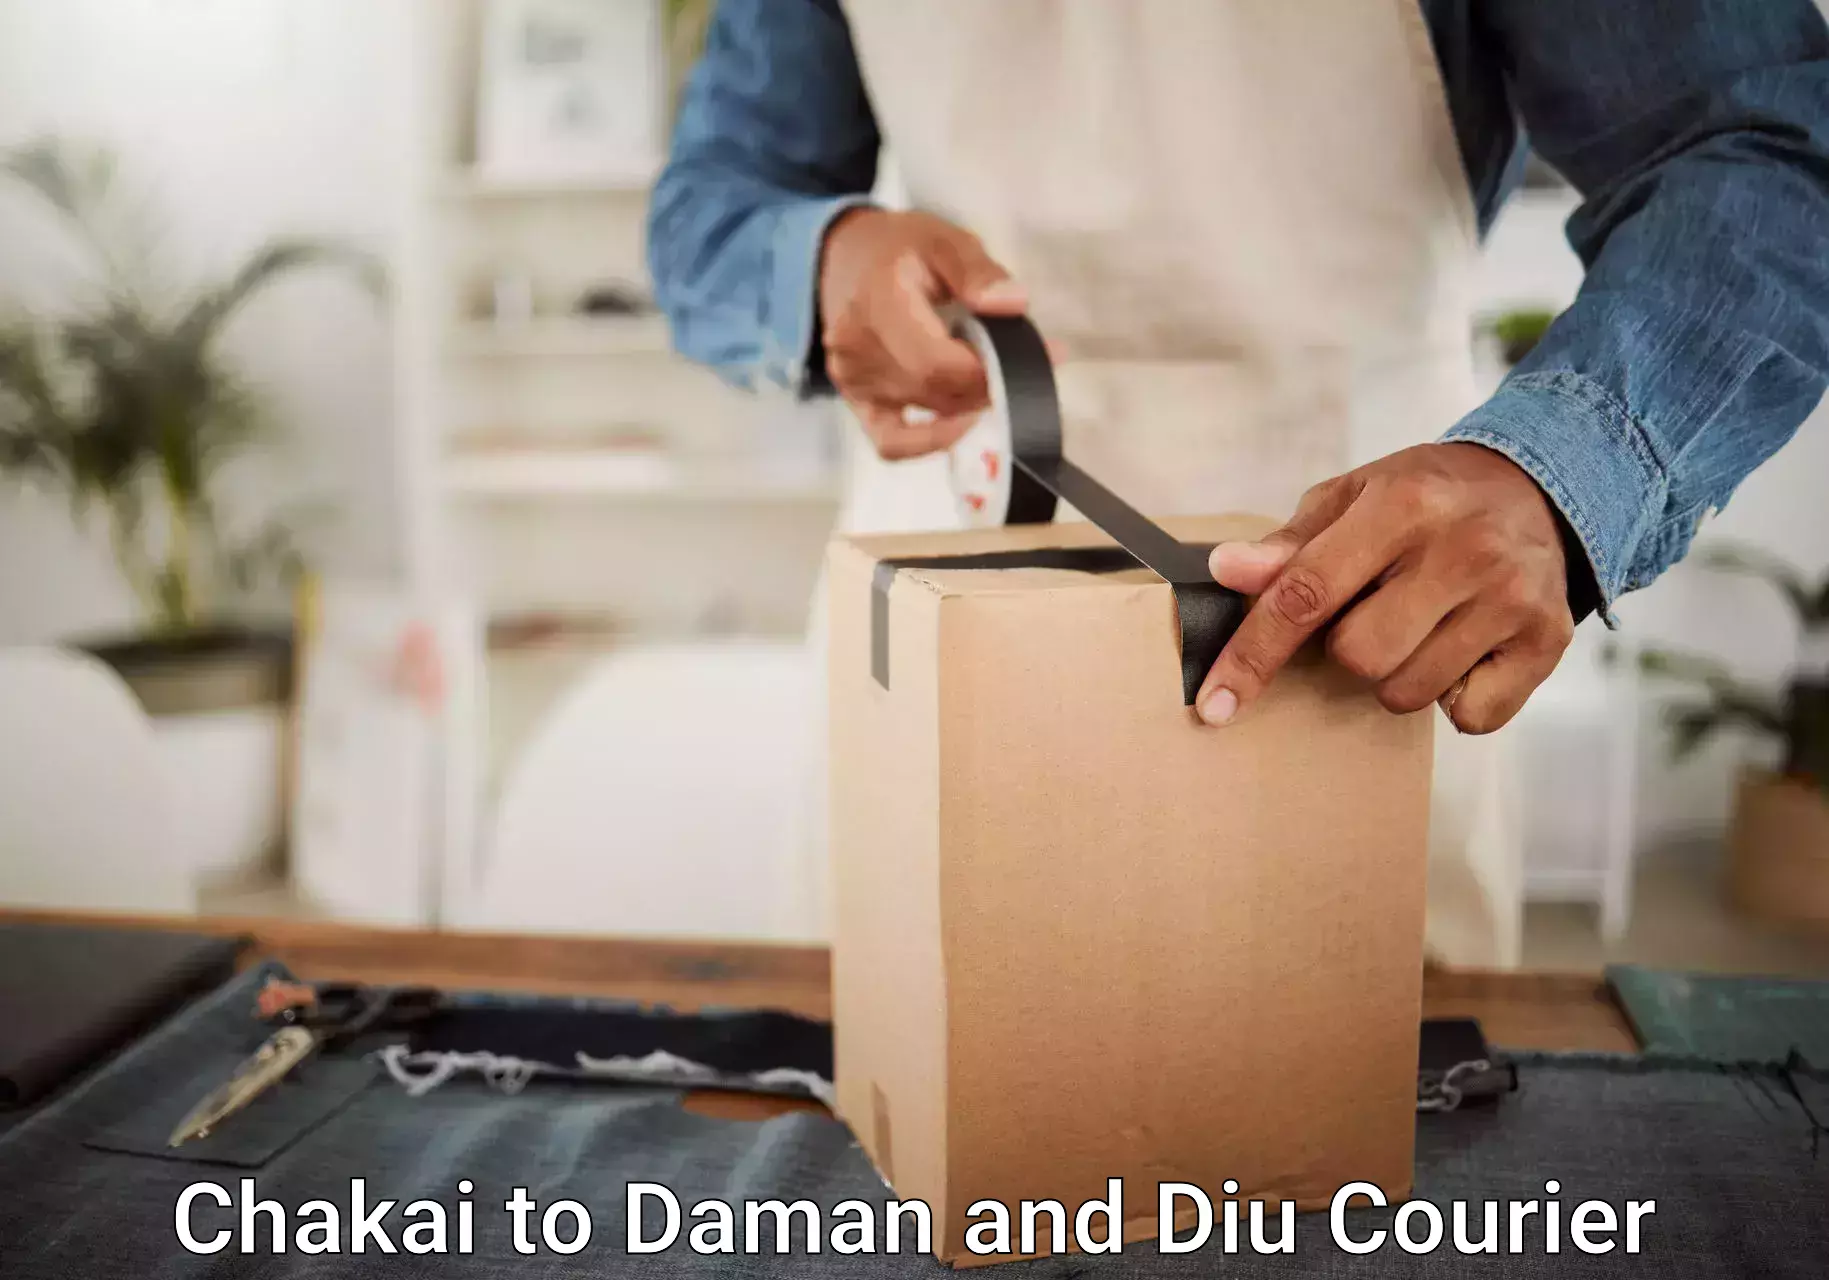 Luggage delivery network Chakai to Daman and Diu